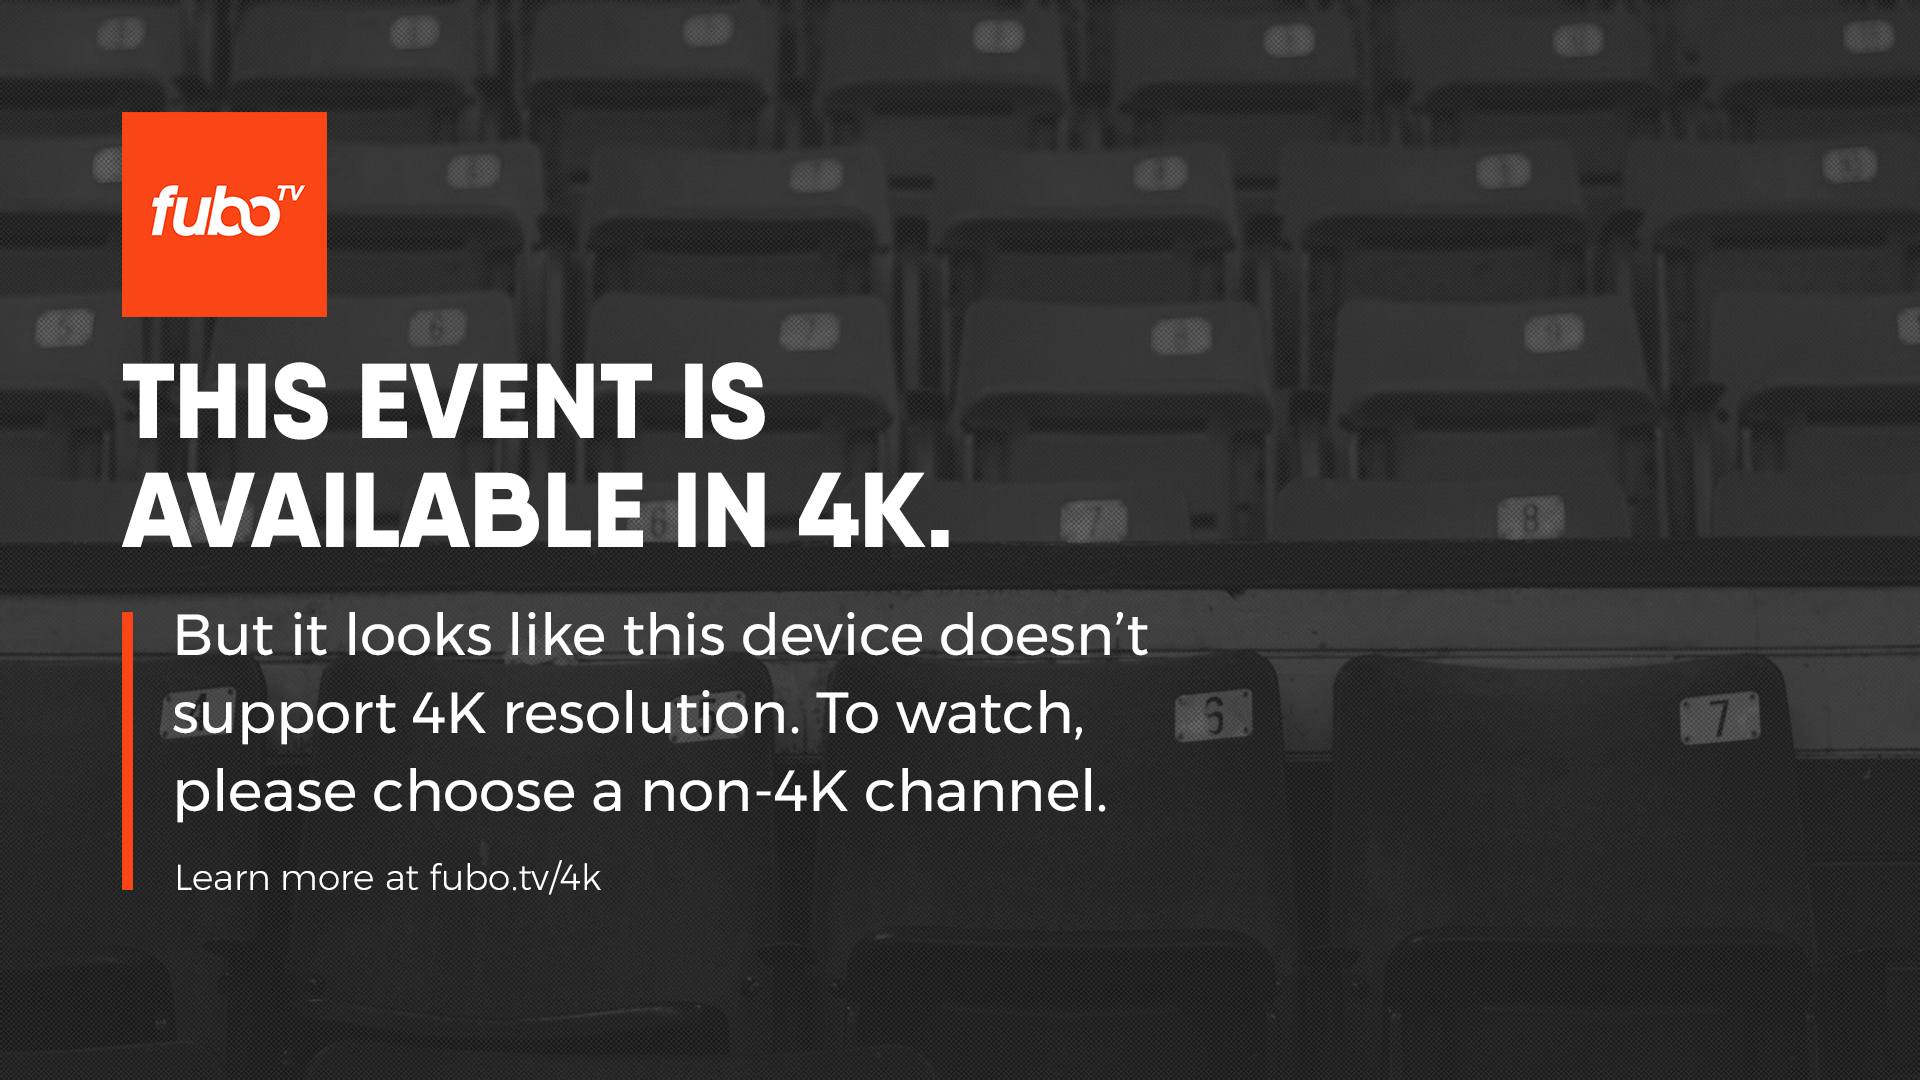 Slate message a customer may see when attempting to watch 4K programming on a device that does not support 4K streaming